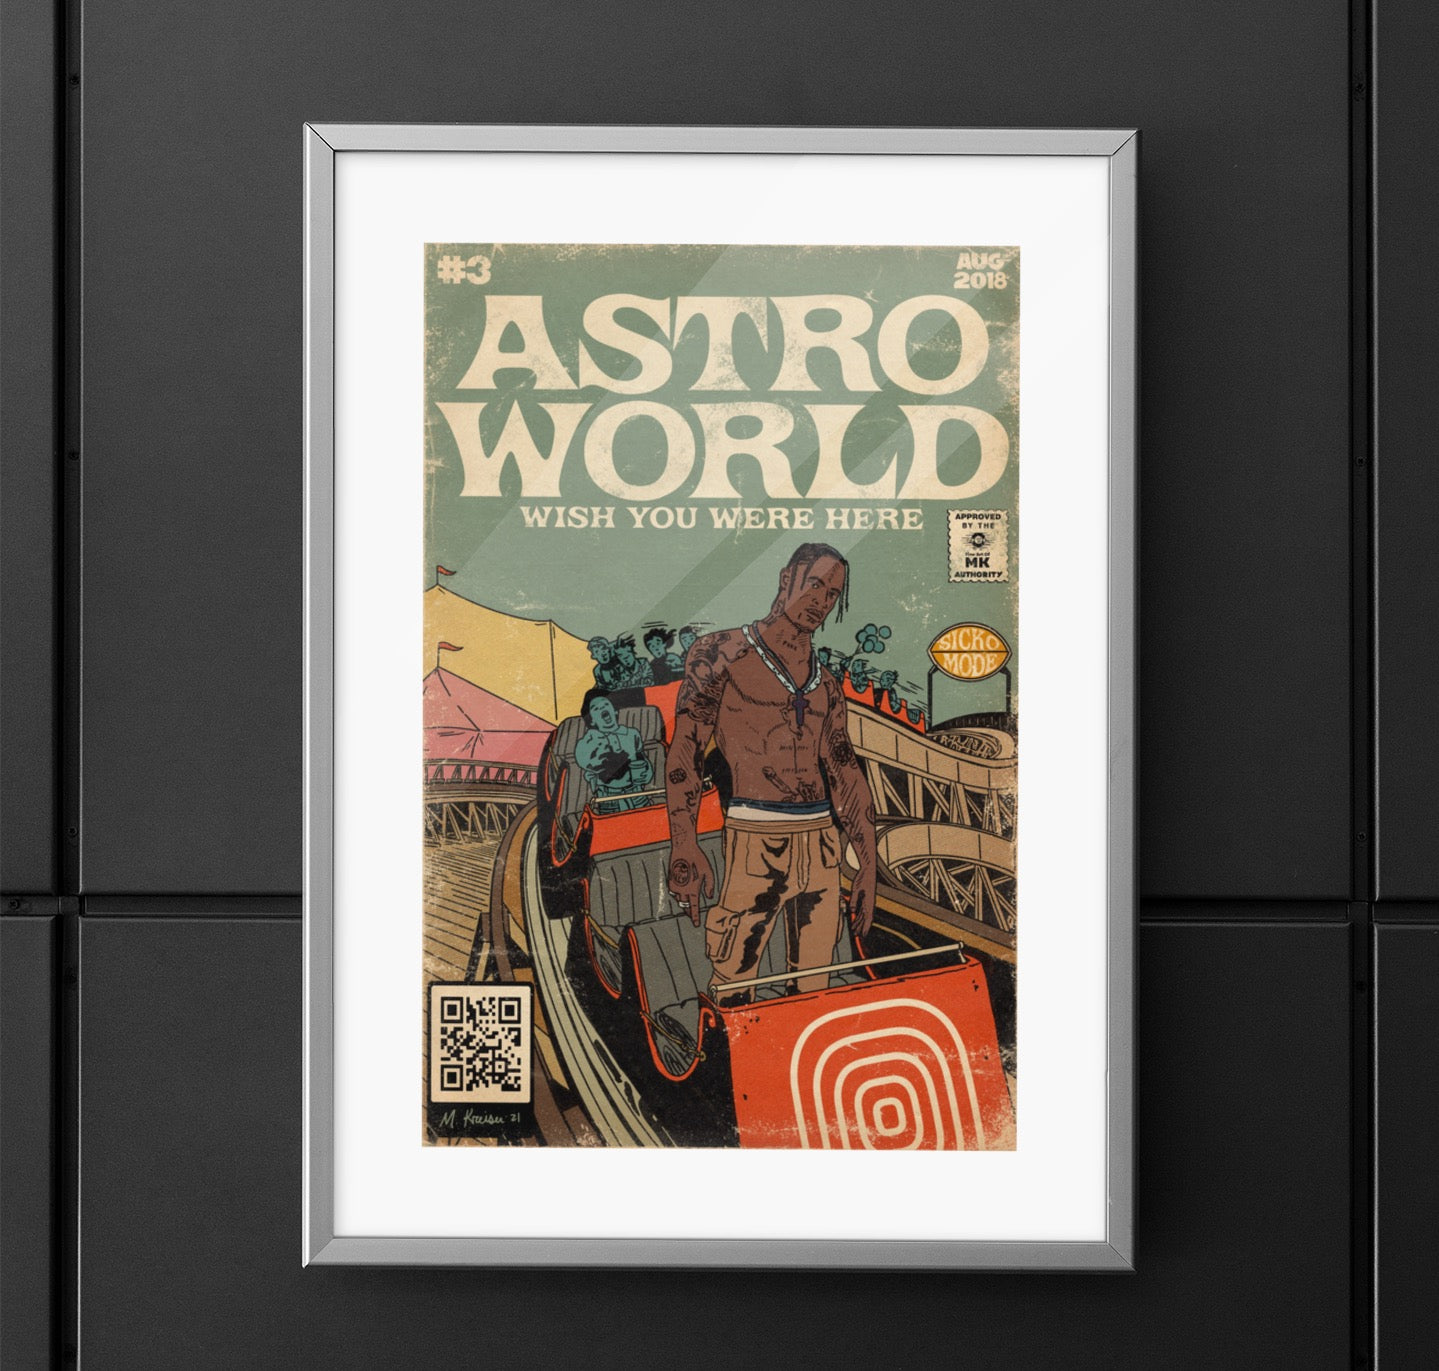 The rise of astroworld: Analyzing the iconic astroworld poster. – Postenio